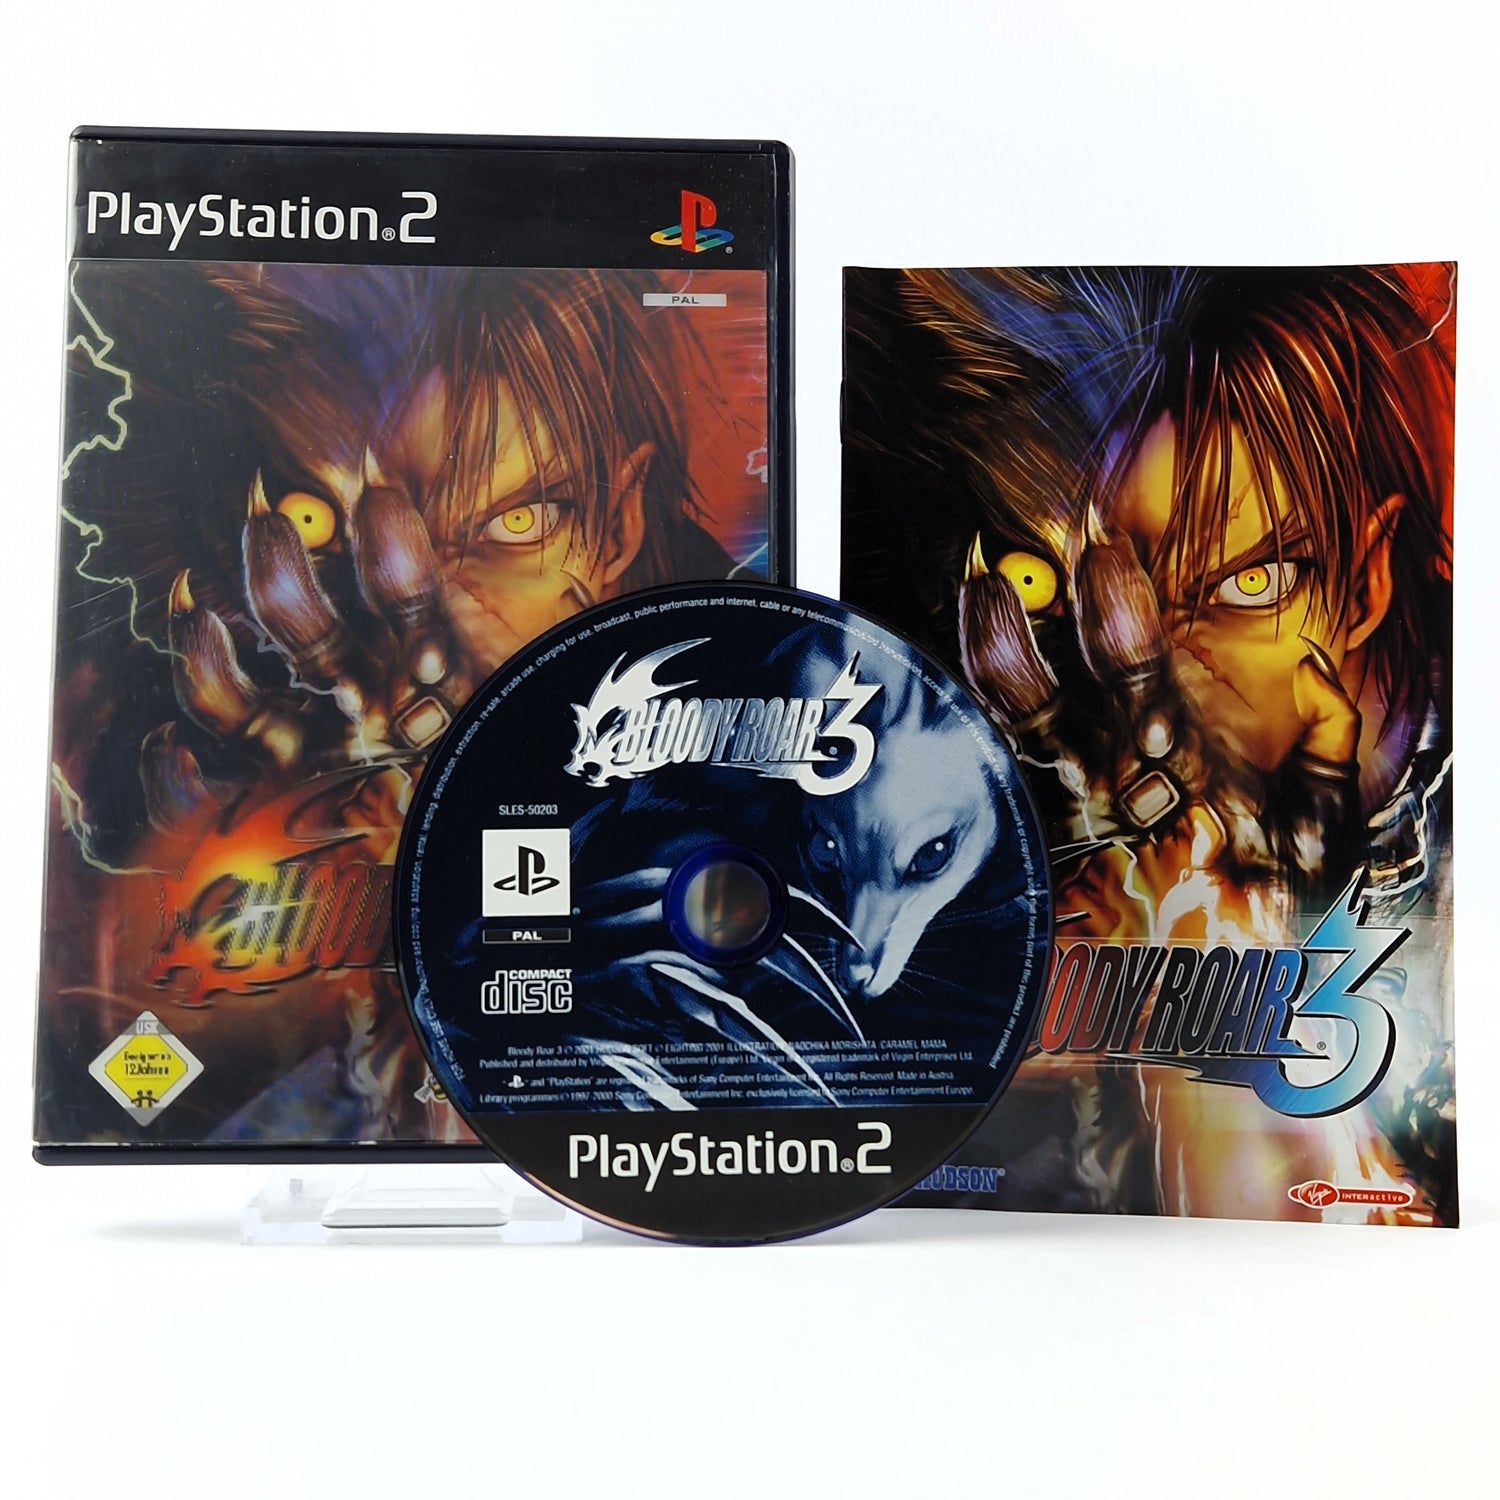 Playstation 2 game: Blood Roar 3 with 3D cover - CD instructions OVP SONY PS2 PAL